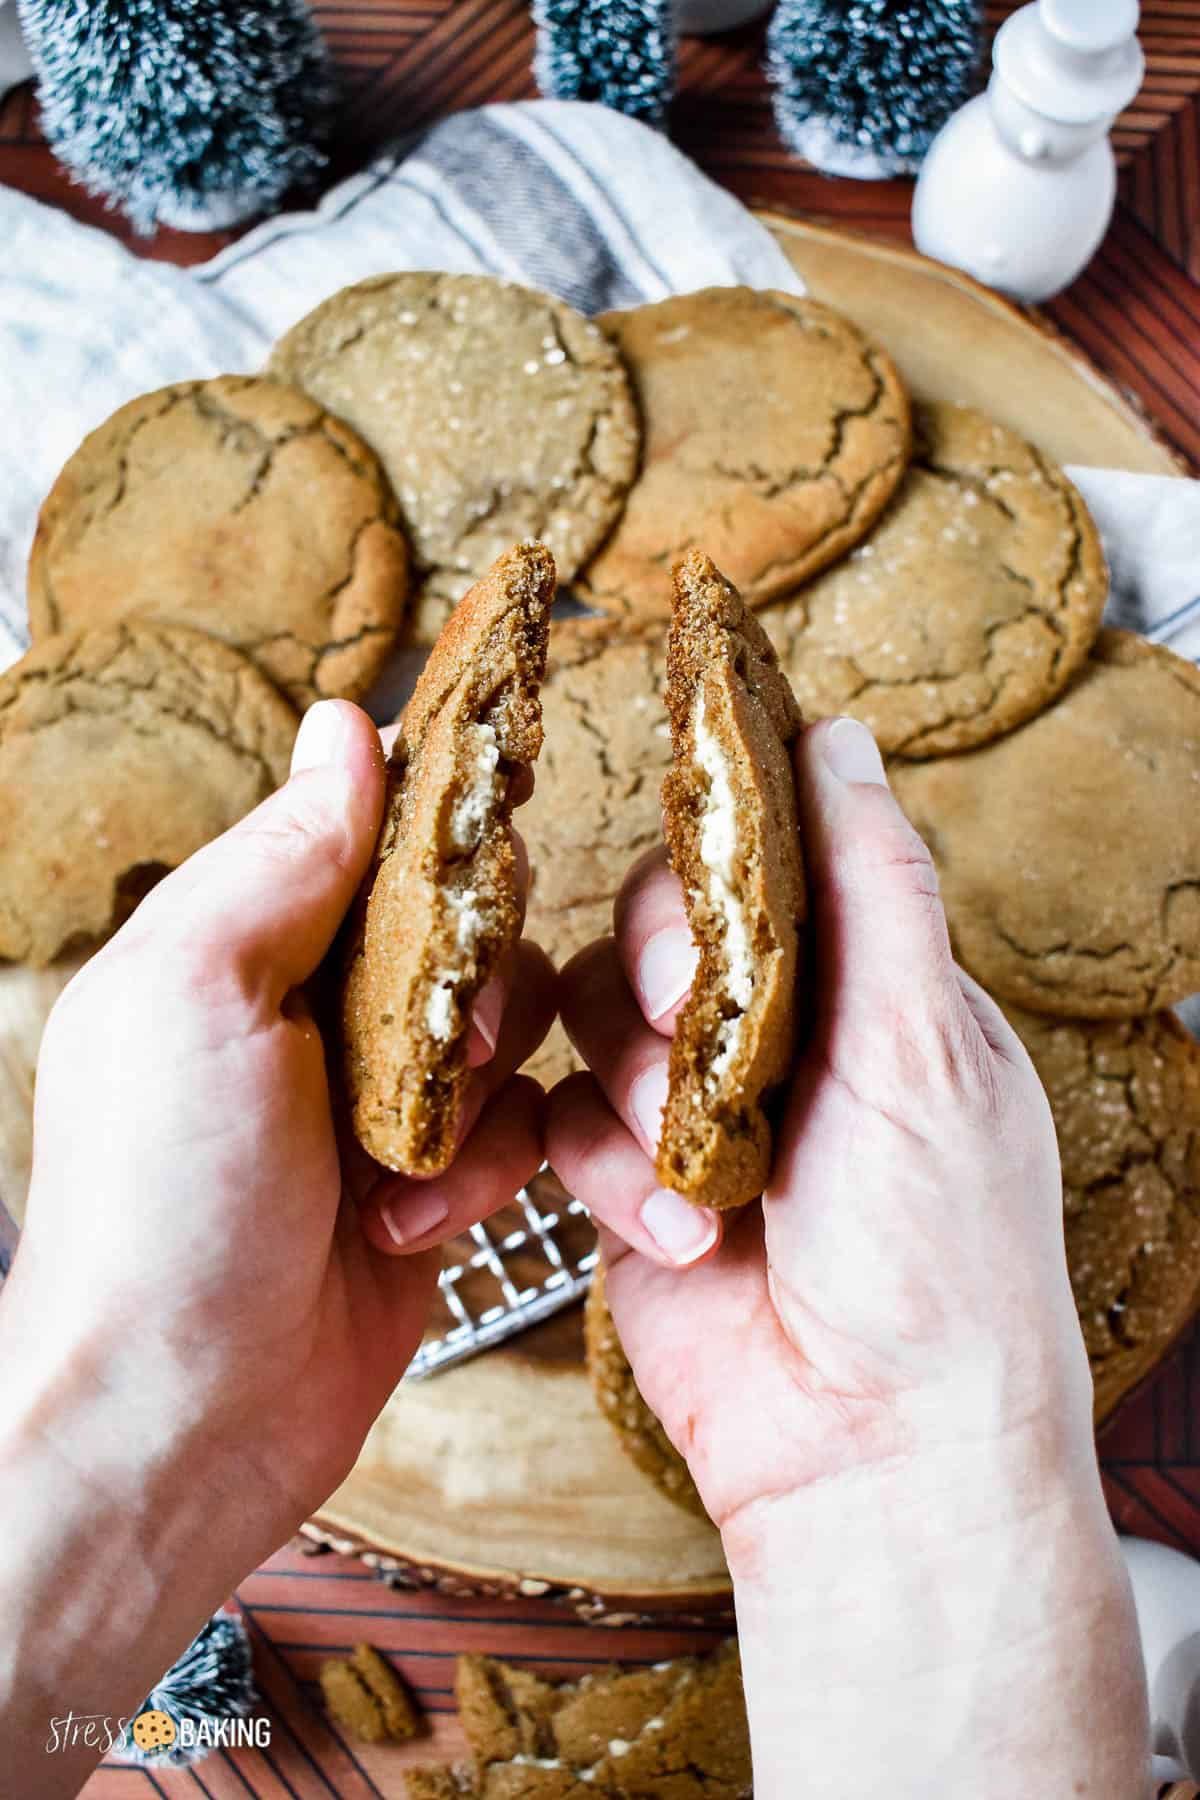 A soft and chewy gingerbread cookie broken in half to show the cheesecake filling inside